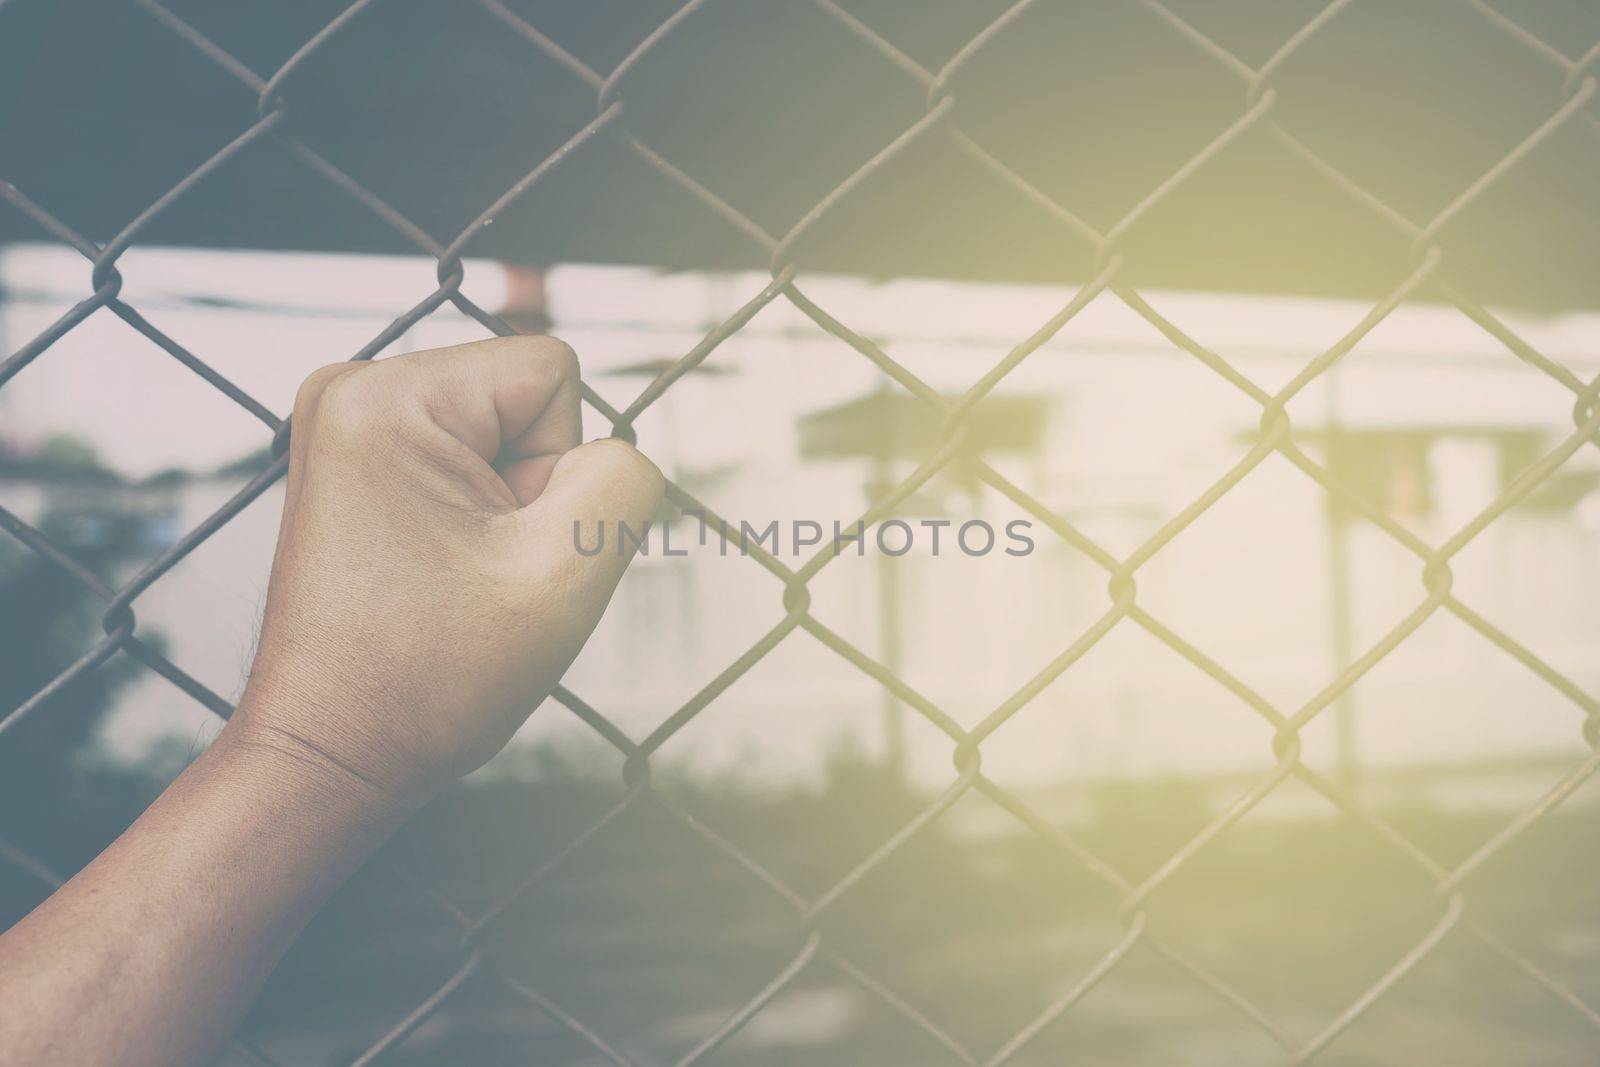 Fist on Chain Link Fence Background.